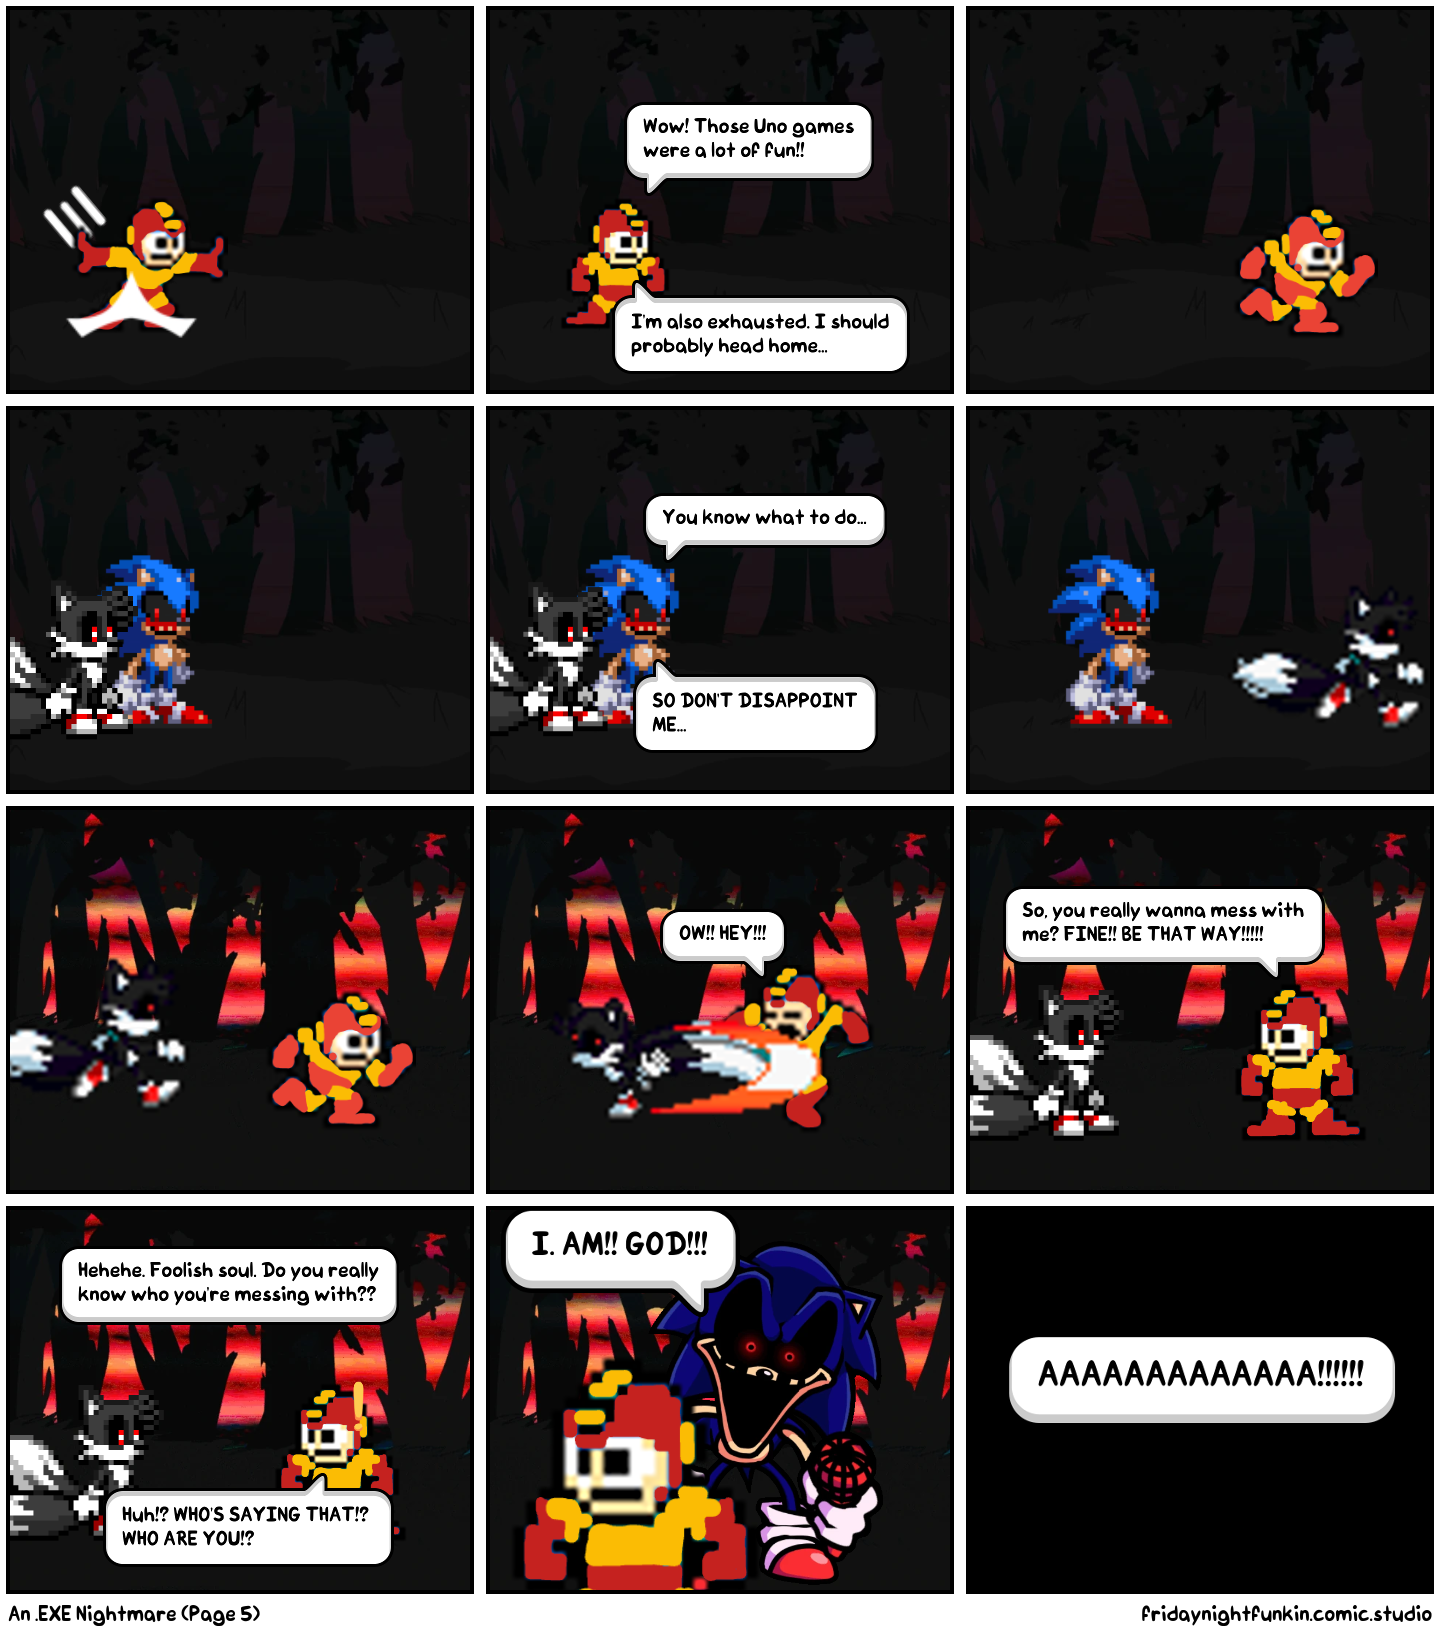 An .EXE Nightmare (Page 5)